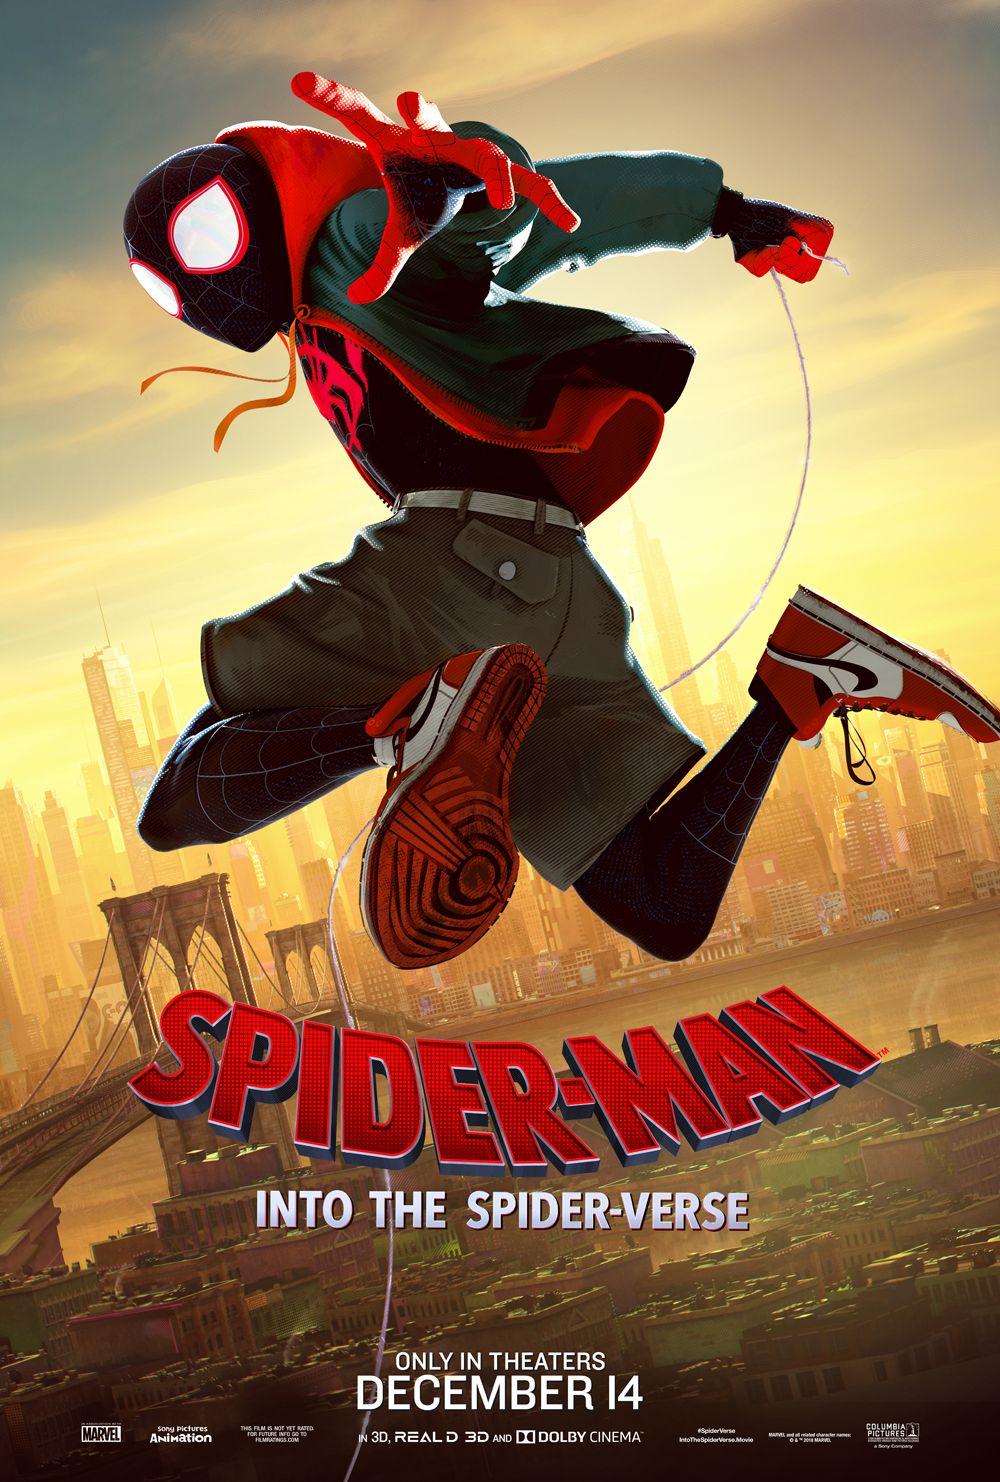 Into the SpiderVerse Spoiler Review Speculates That It